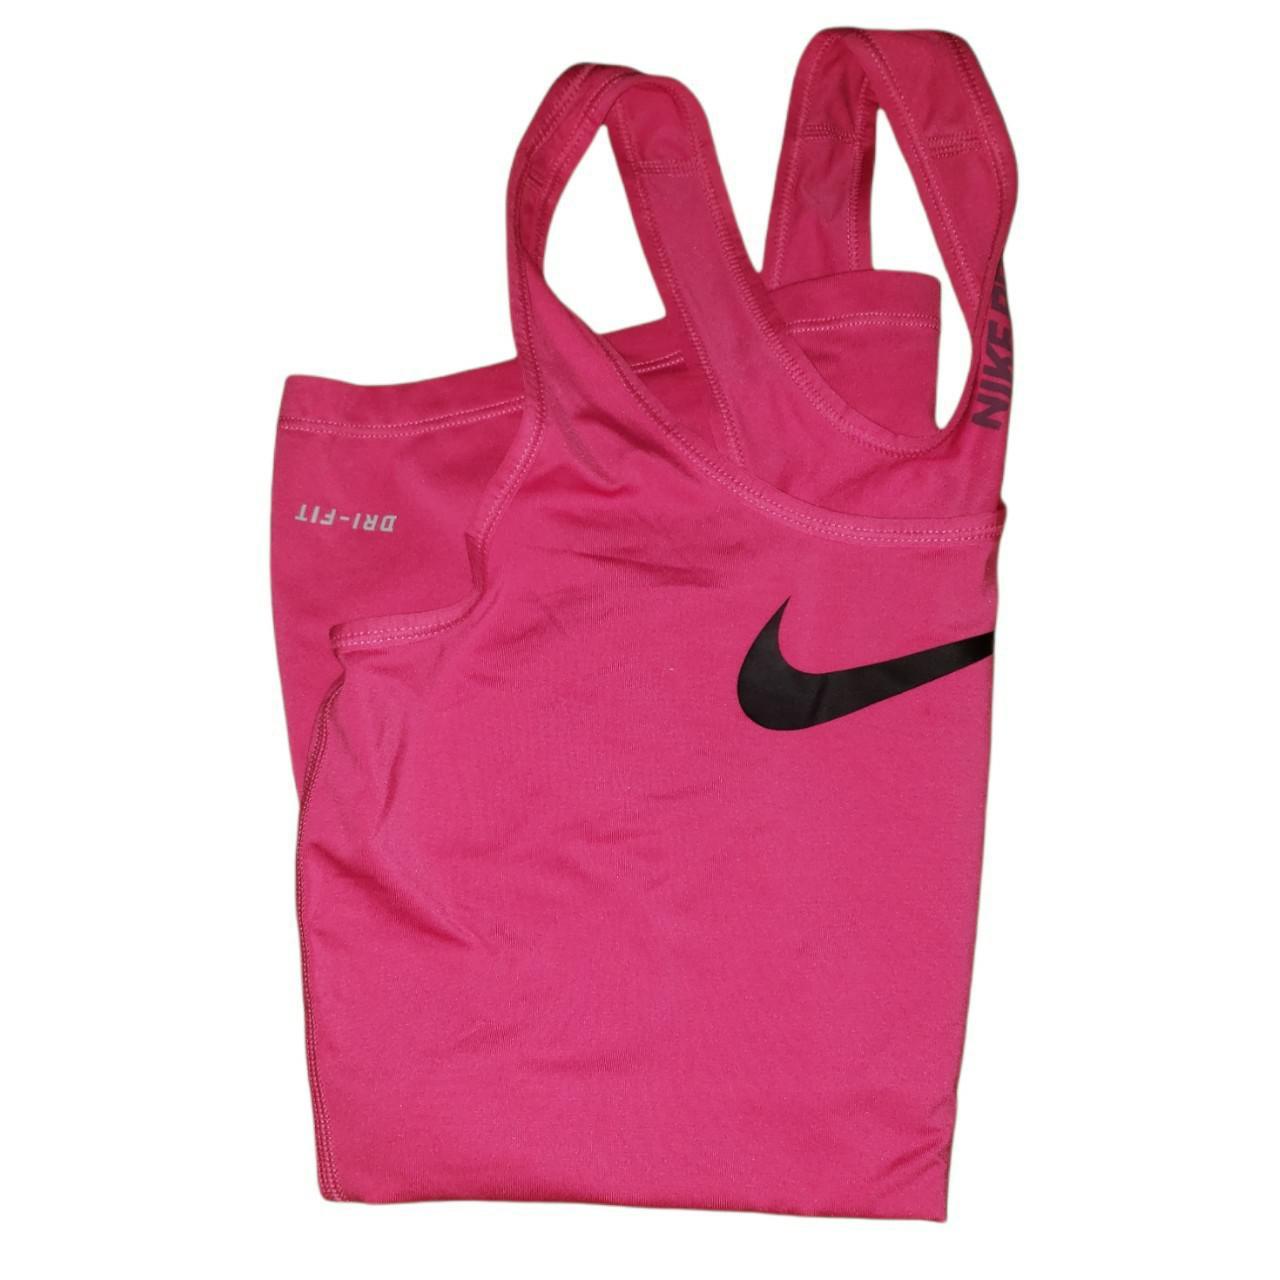 Product Image 3 - Nike Pro Pink Tank Top
Size